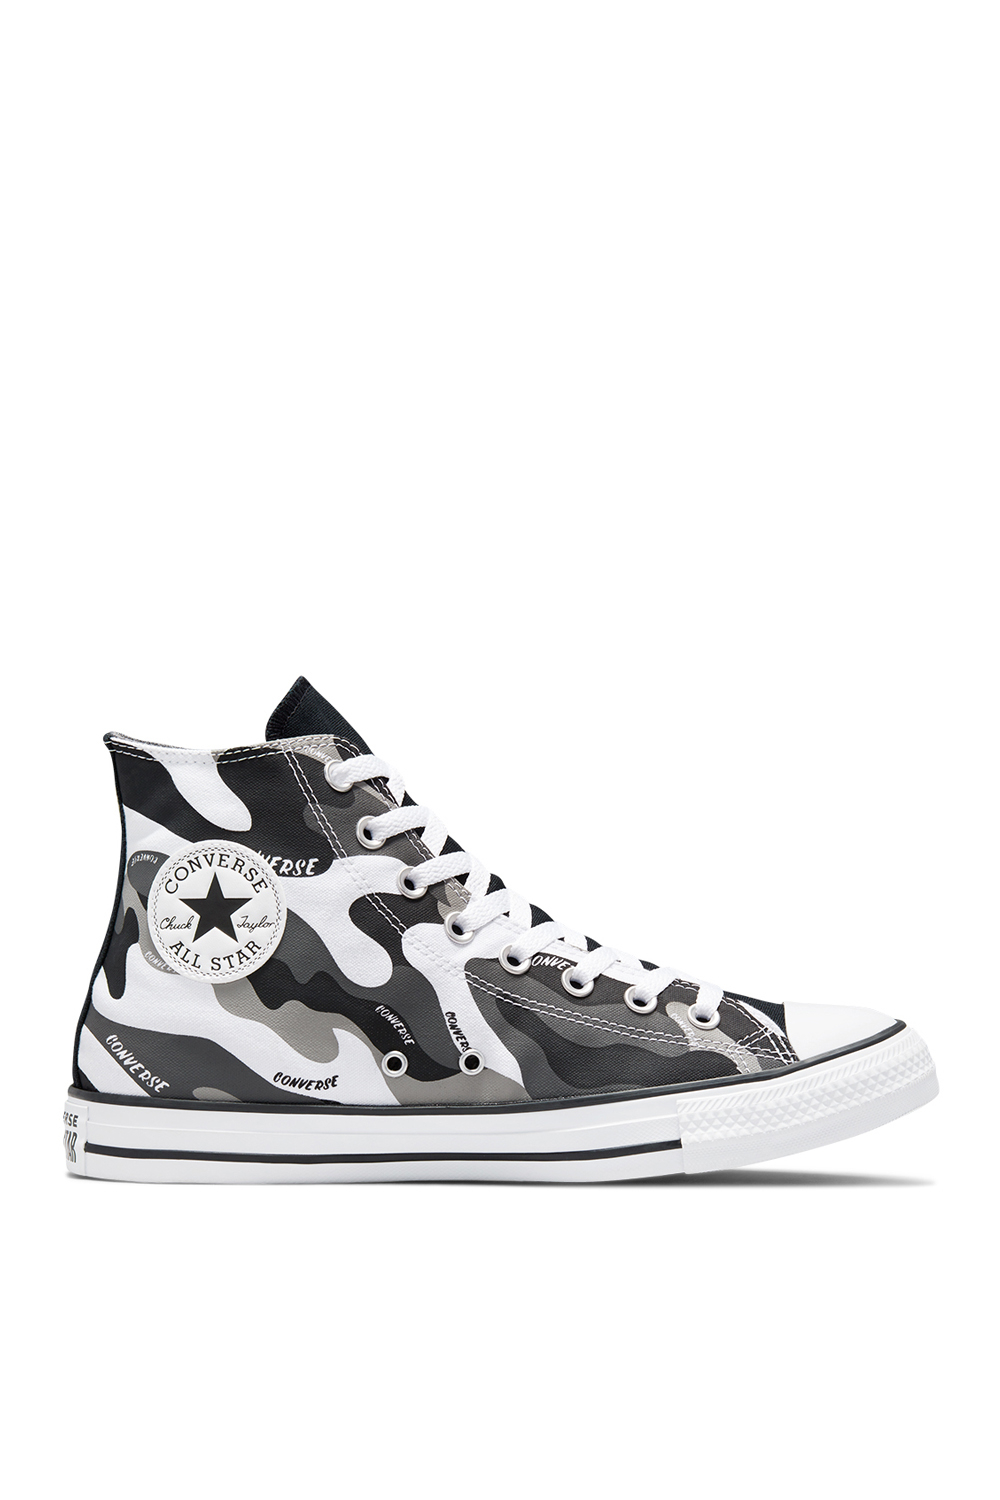 Converse Mens Lifestyle Shoes | Odel.lk